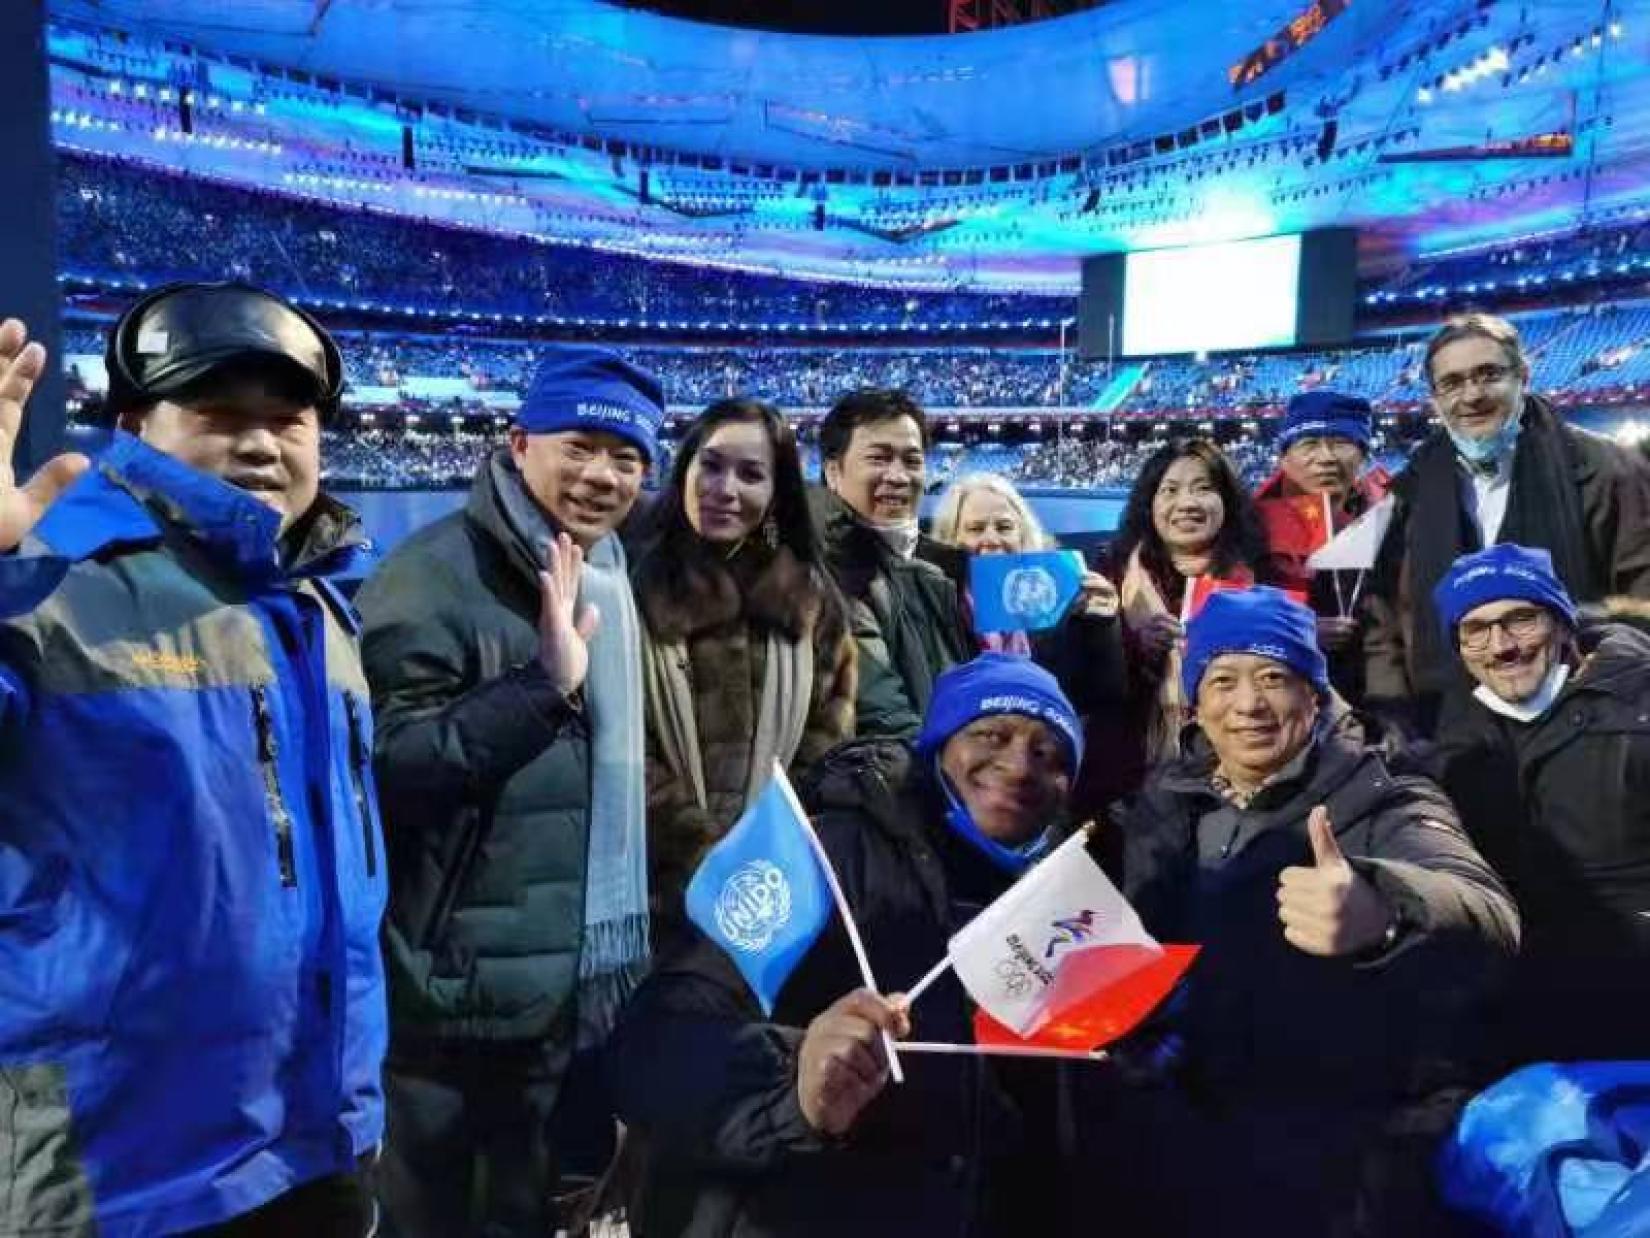 Vanno Noupech at the opening ceremony of the Beijing Winter Olympics